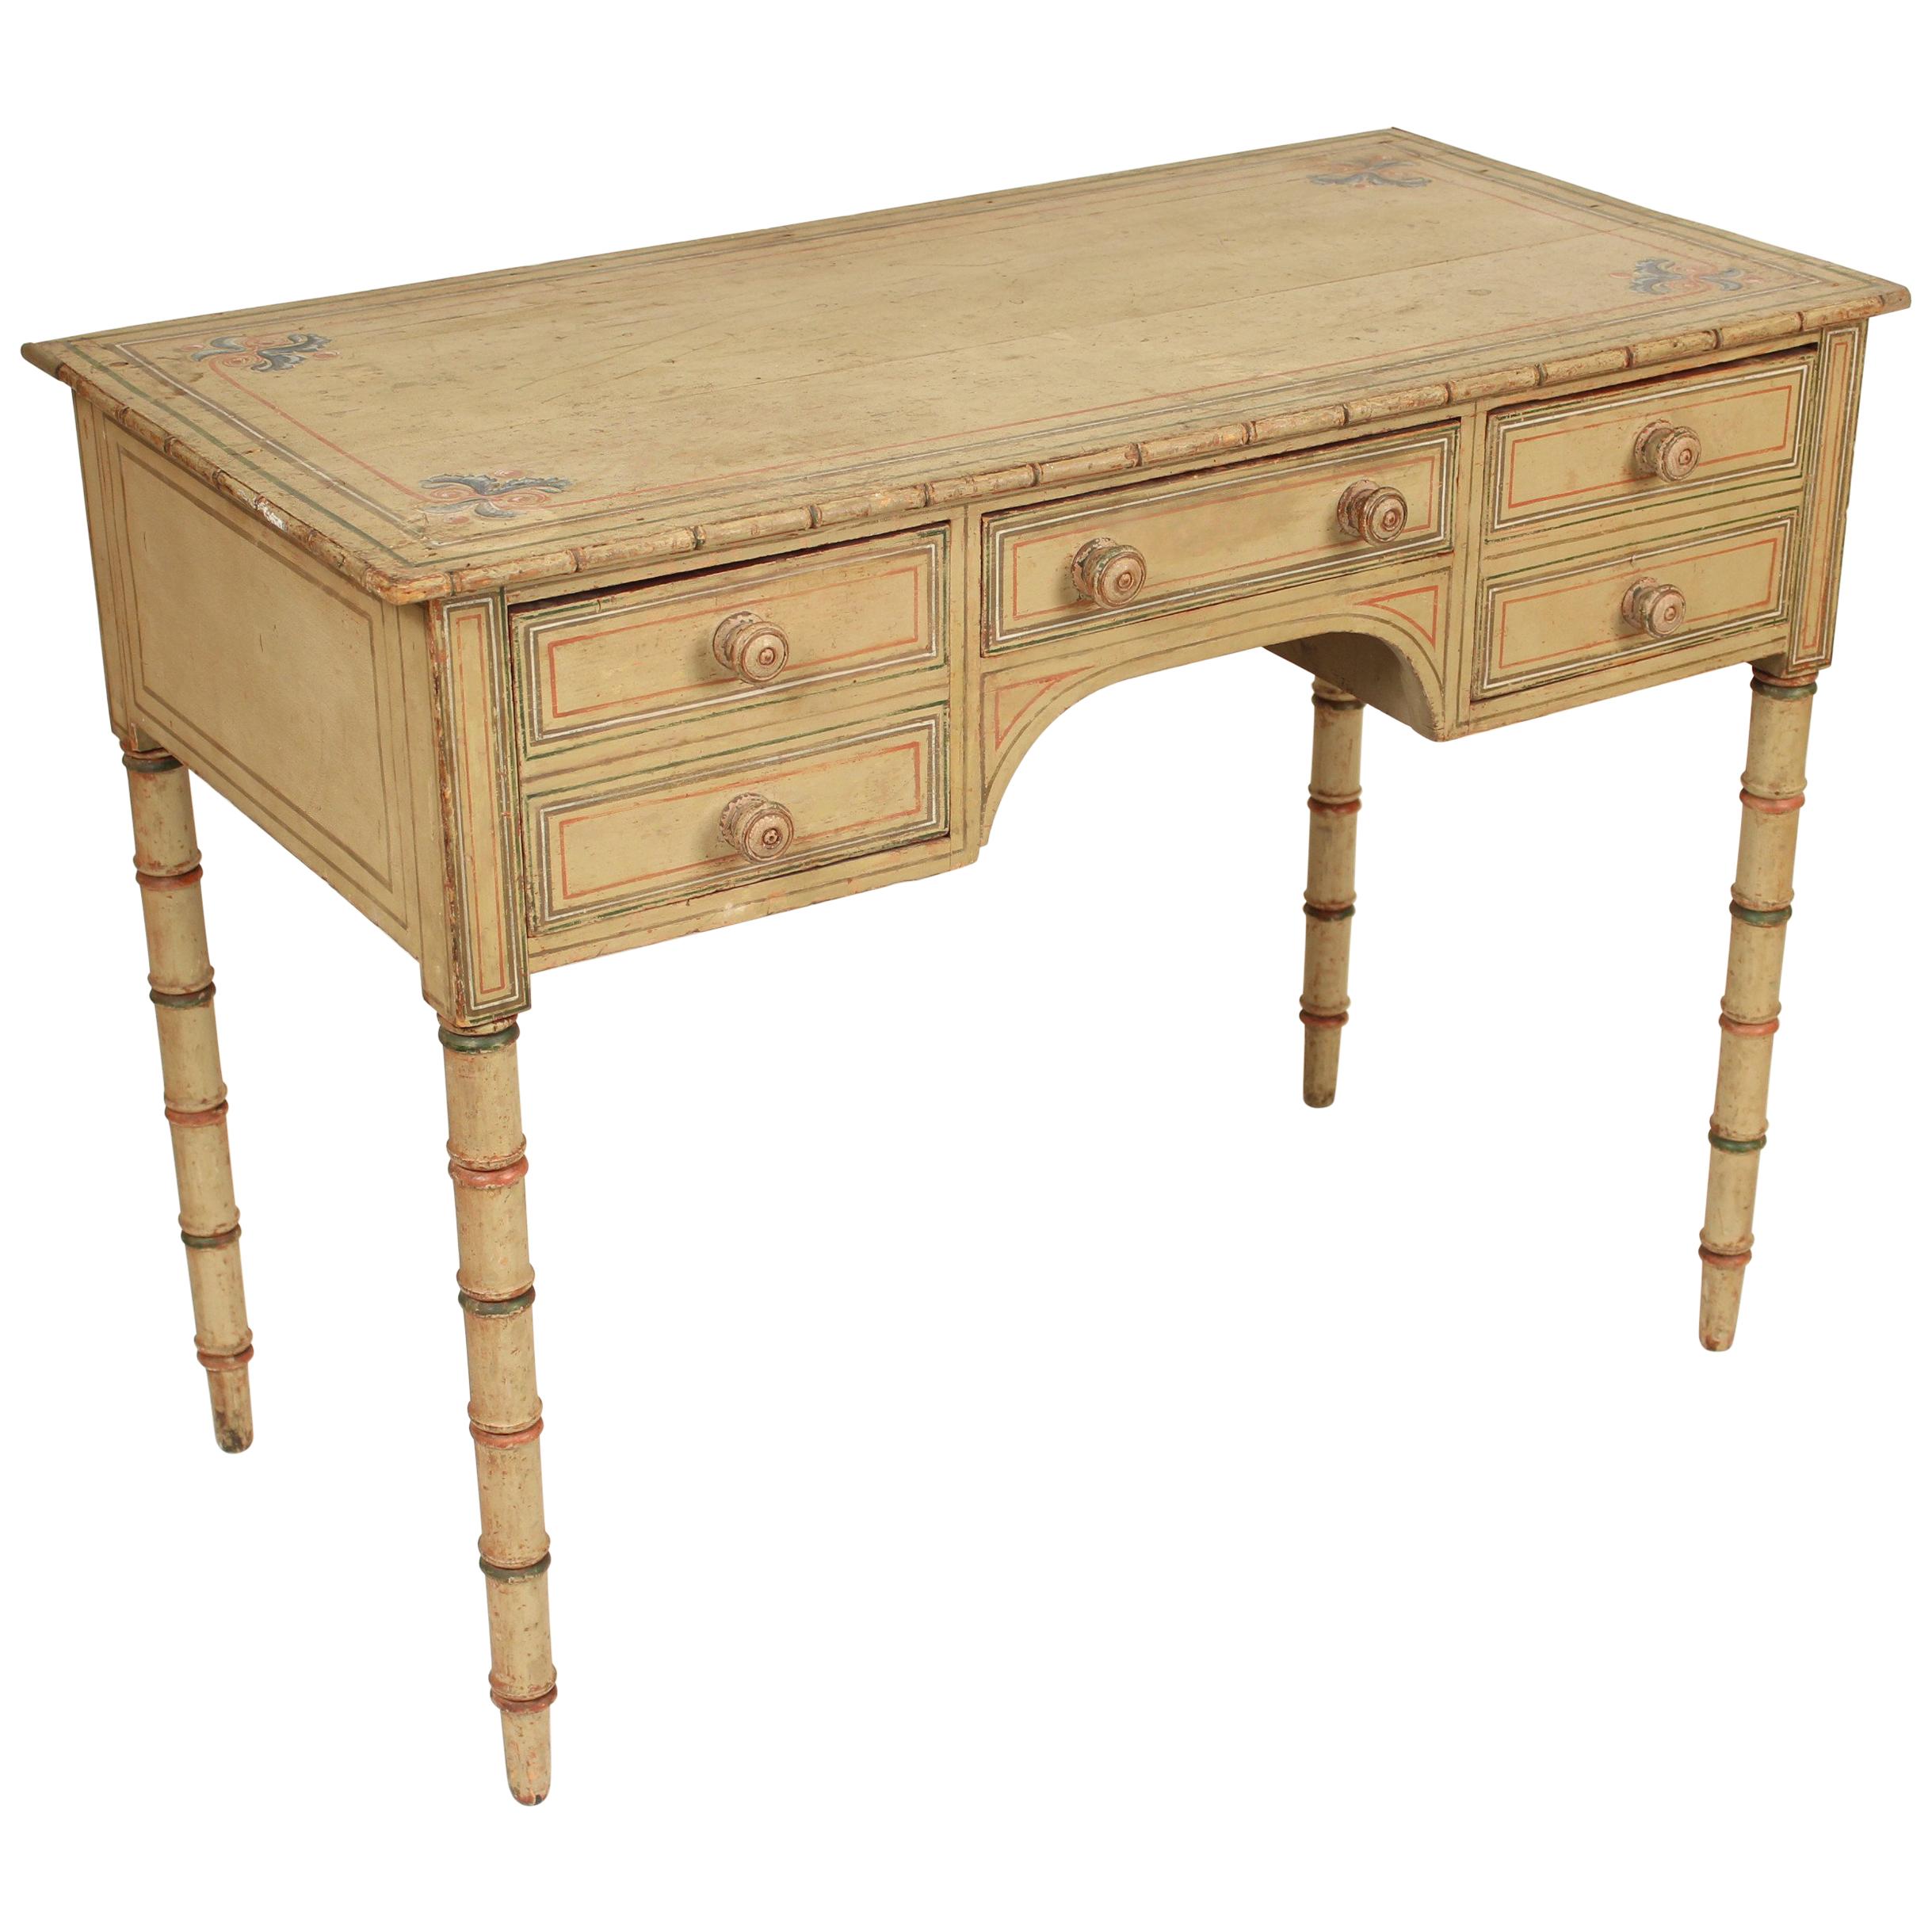 Painted English Regency Writing Table